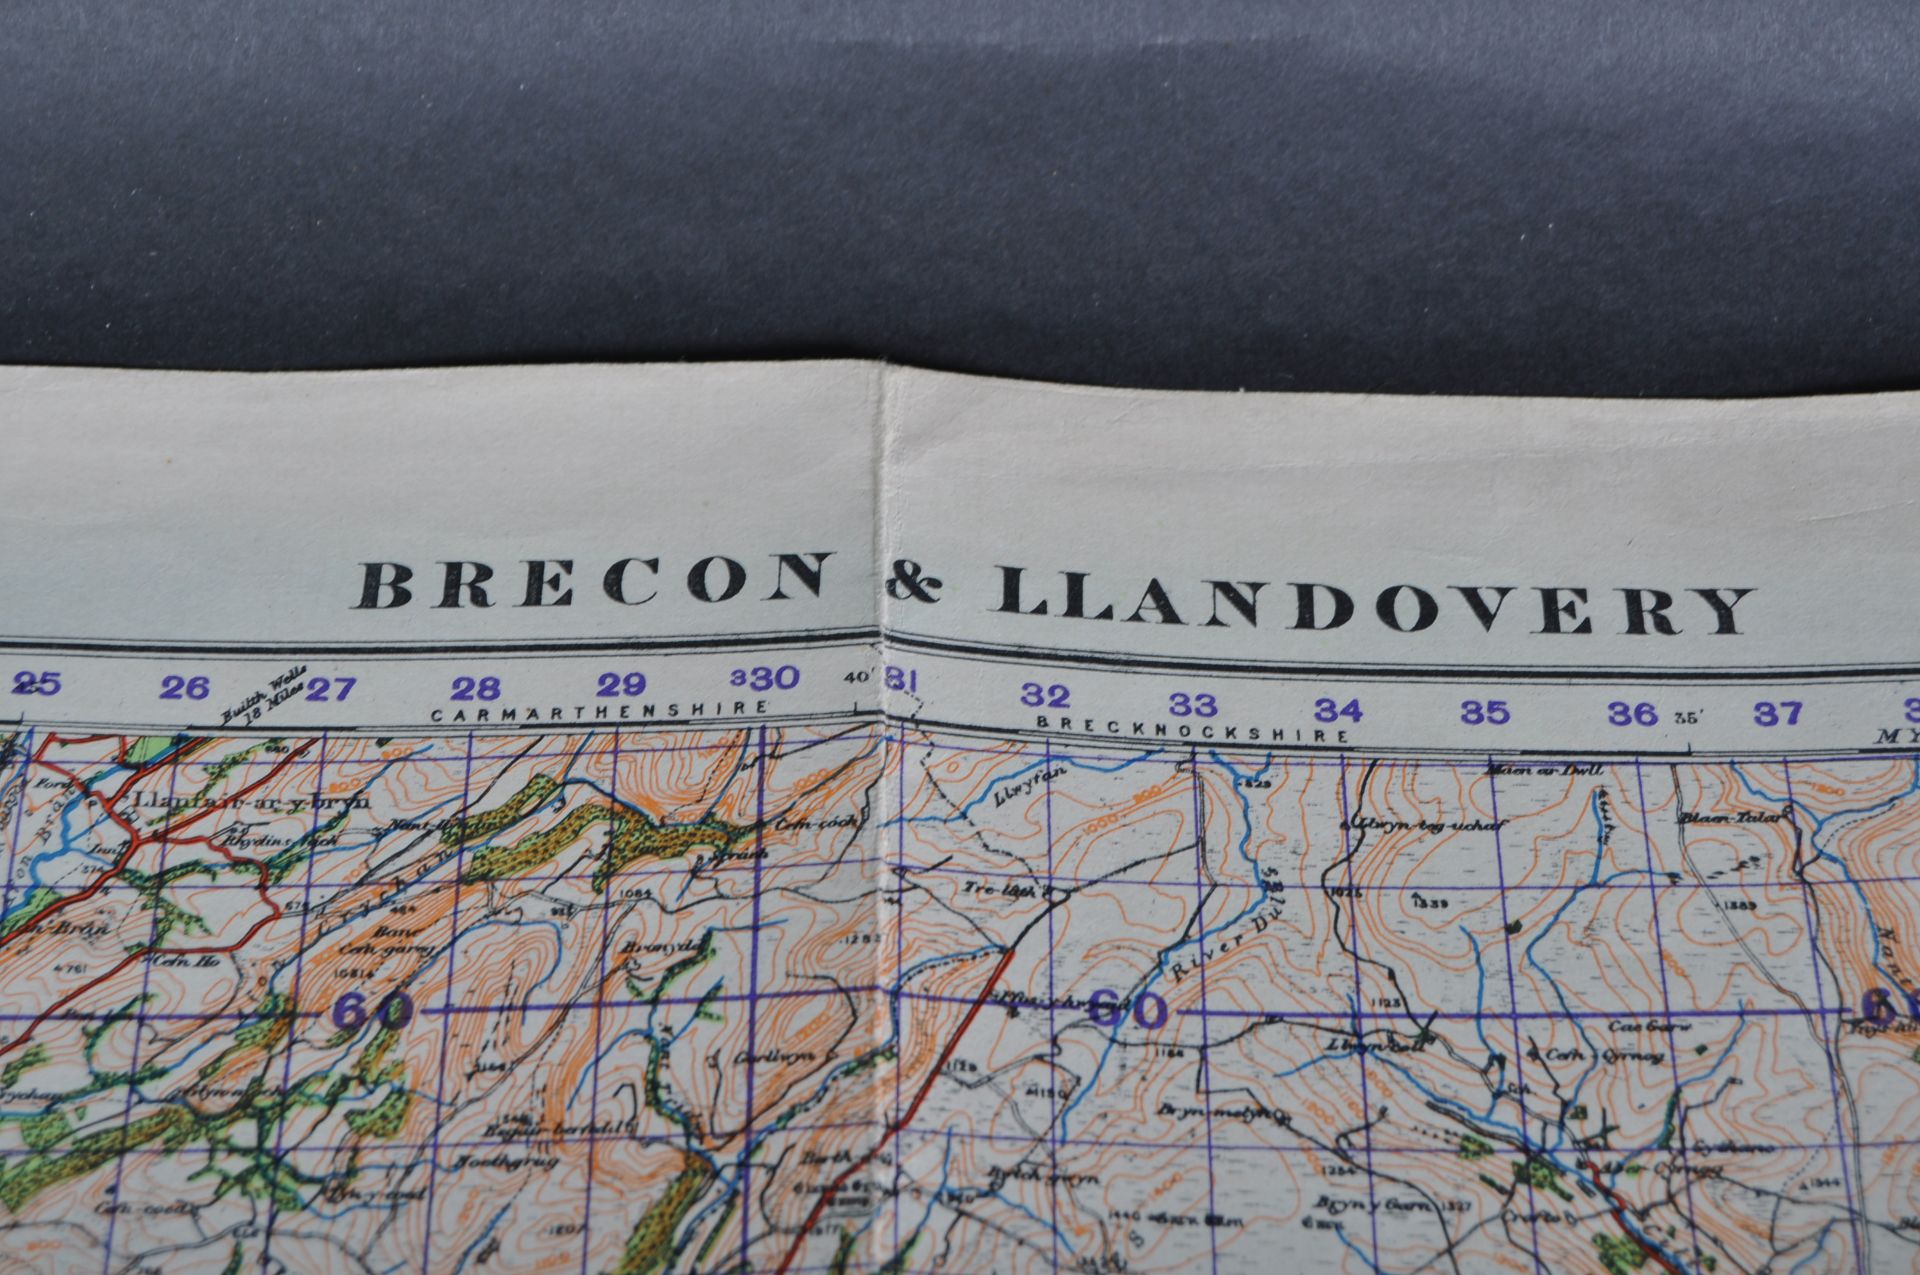 WWII SECOND WORLD WAR ORDNANCE SURVEY MAP - BRECON & LLANDOVERY - Image 4 of 12